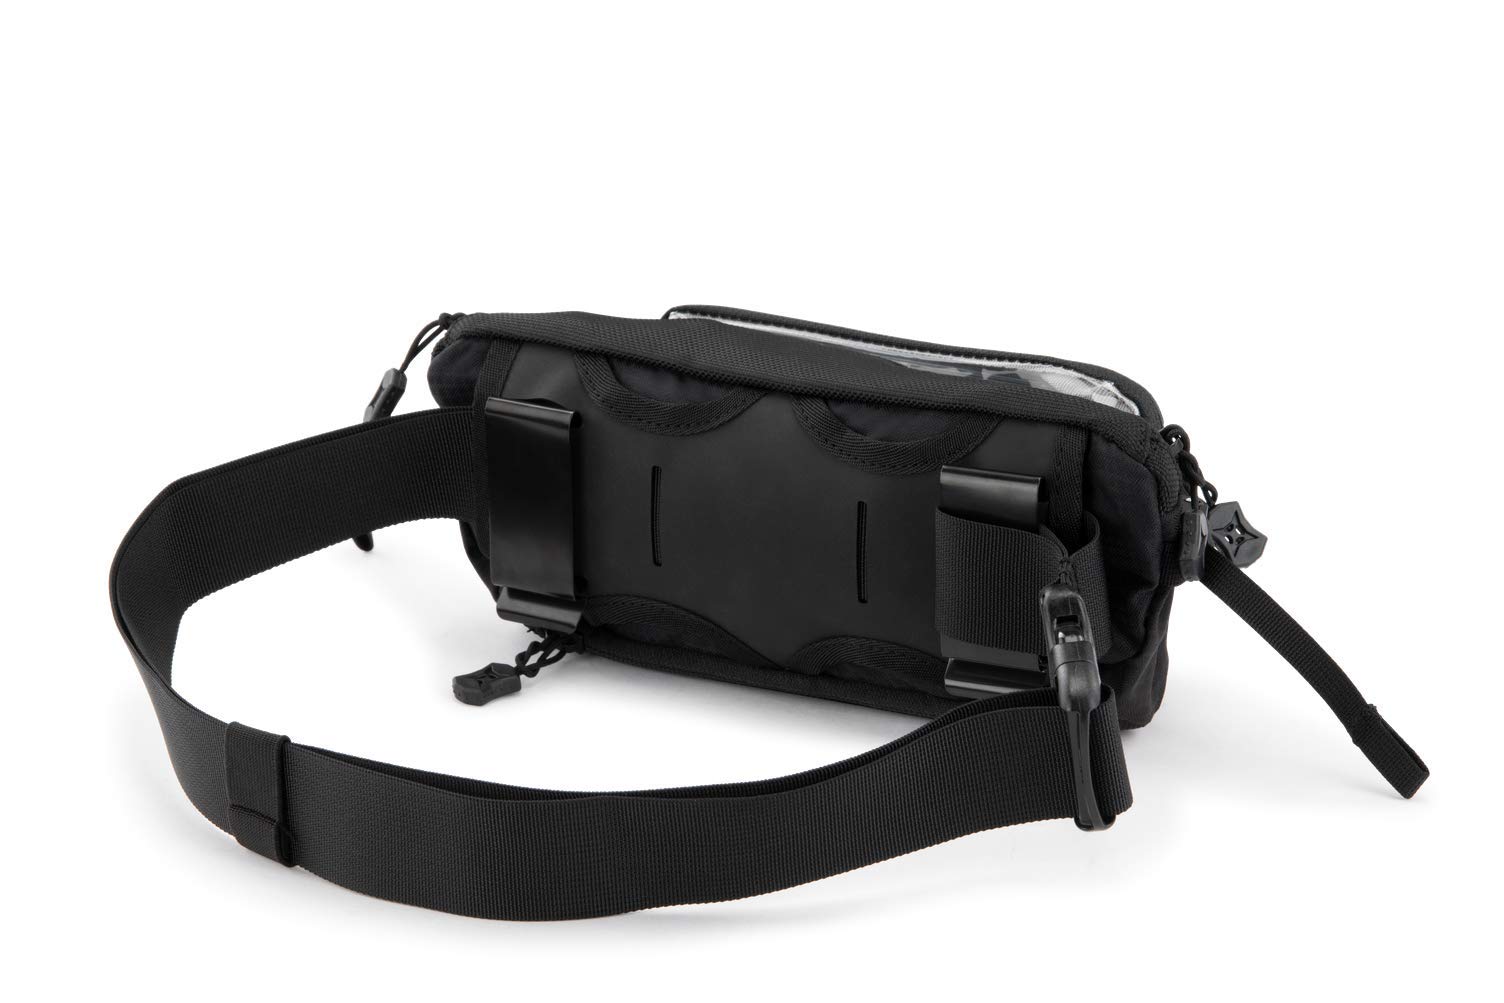 Vertx SOCP Sling Tactical Fanny Pack Waist Utility Hip Pouch Belt Bag with Adjustable Strap, Tactical Work Gear, It's Black